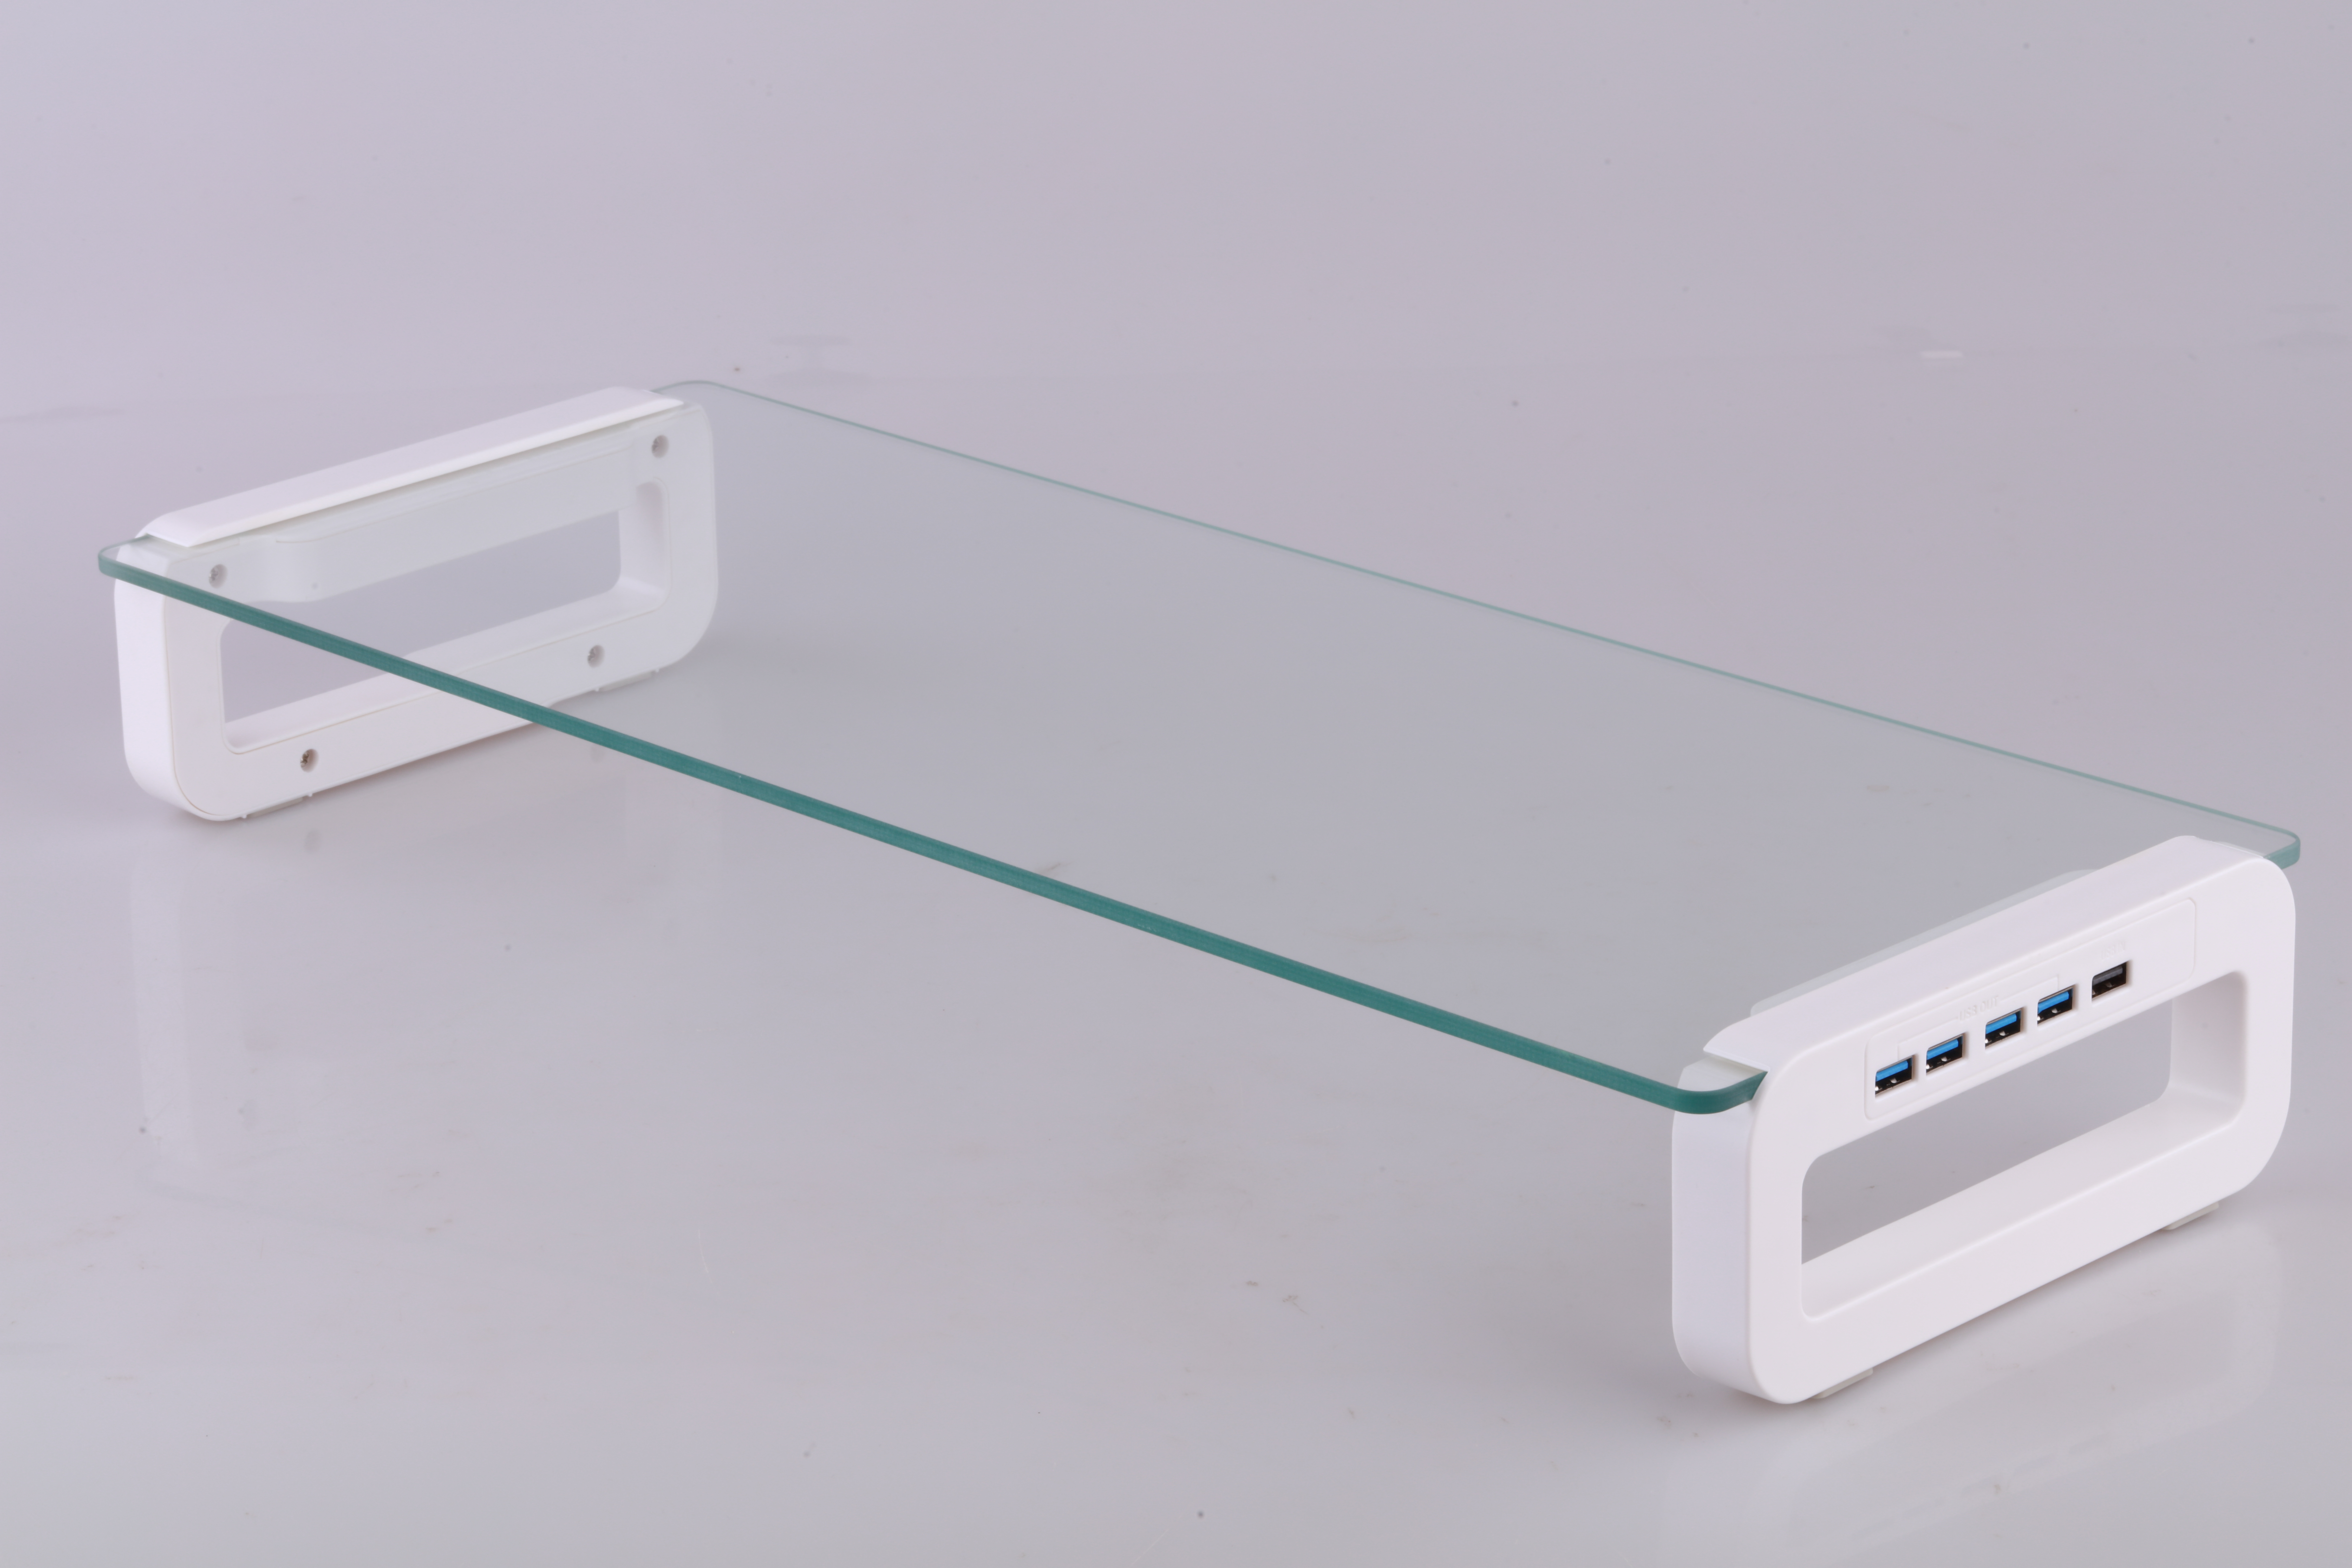 L2 Monitor stand